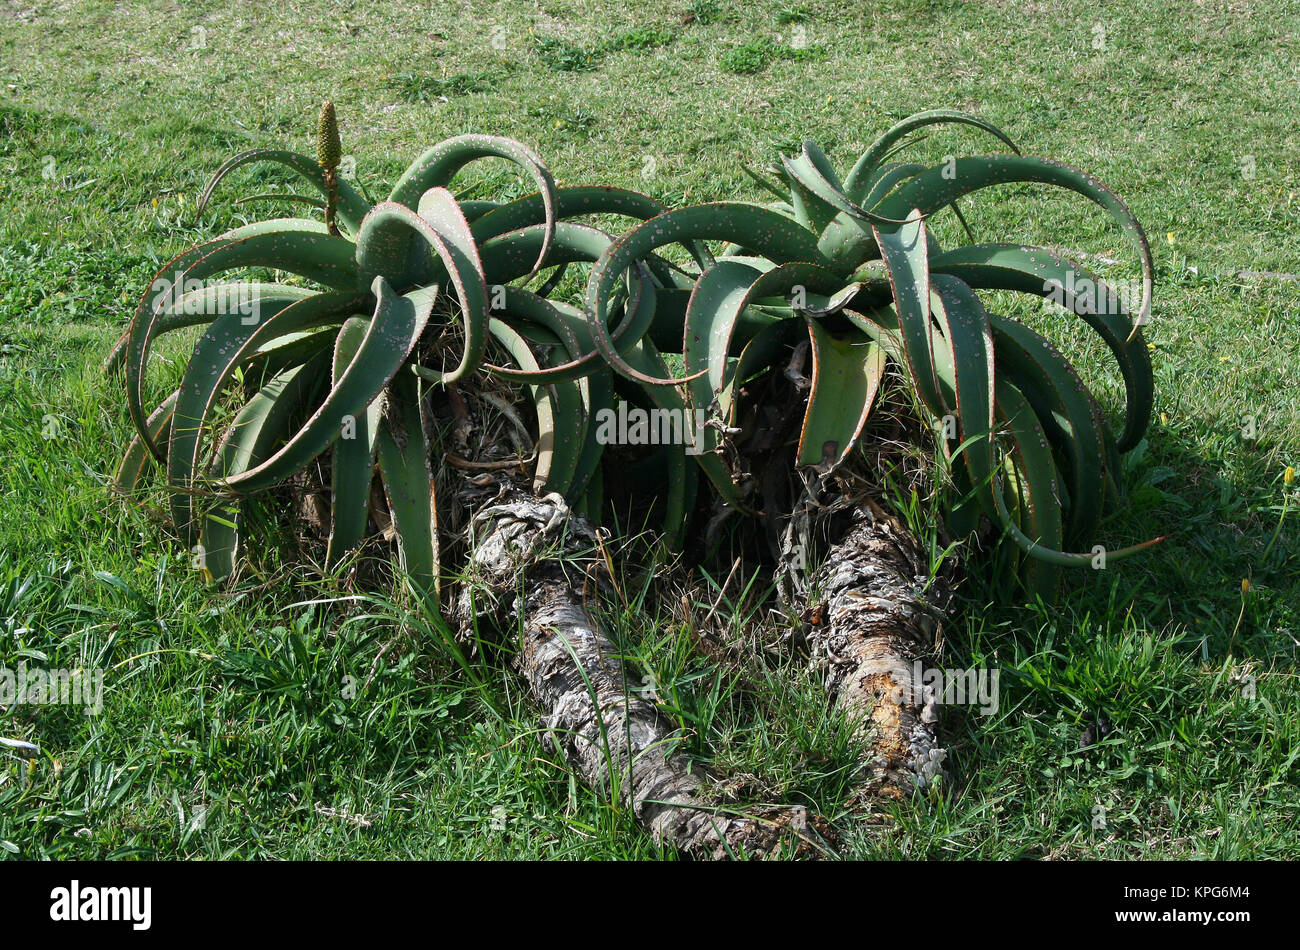 African aloe on the grass at Gonubie beach, East London, close-up Stock Photo